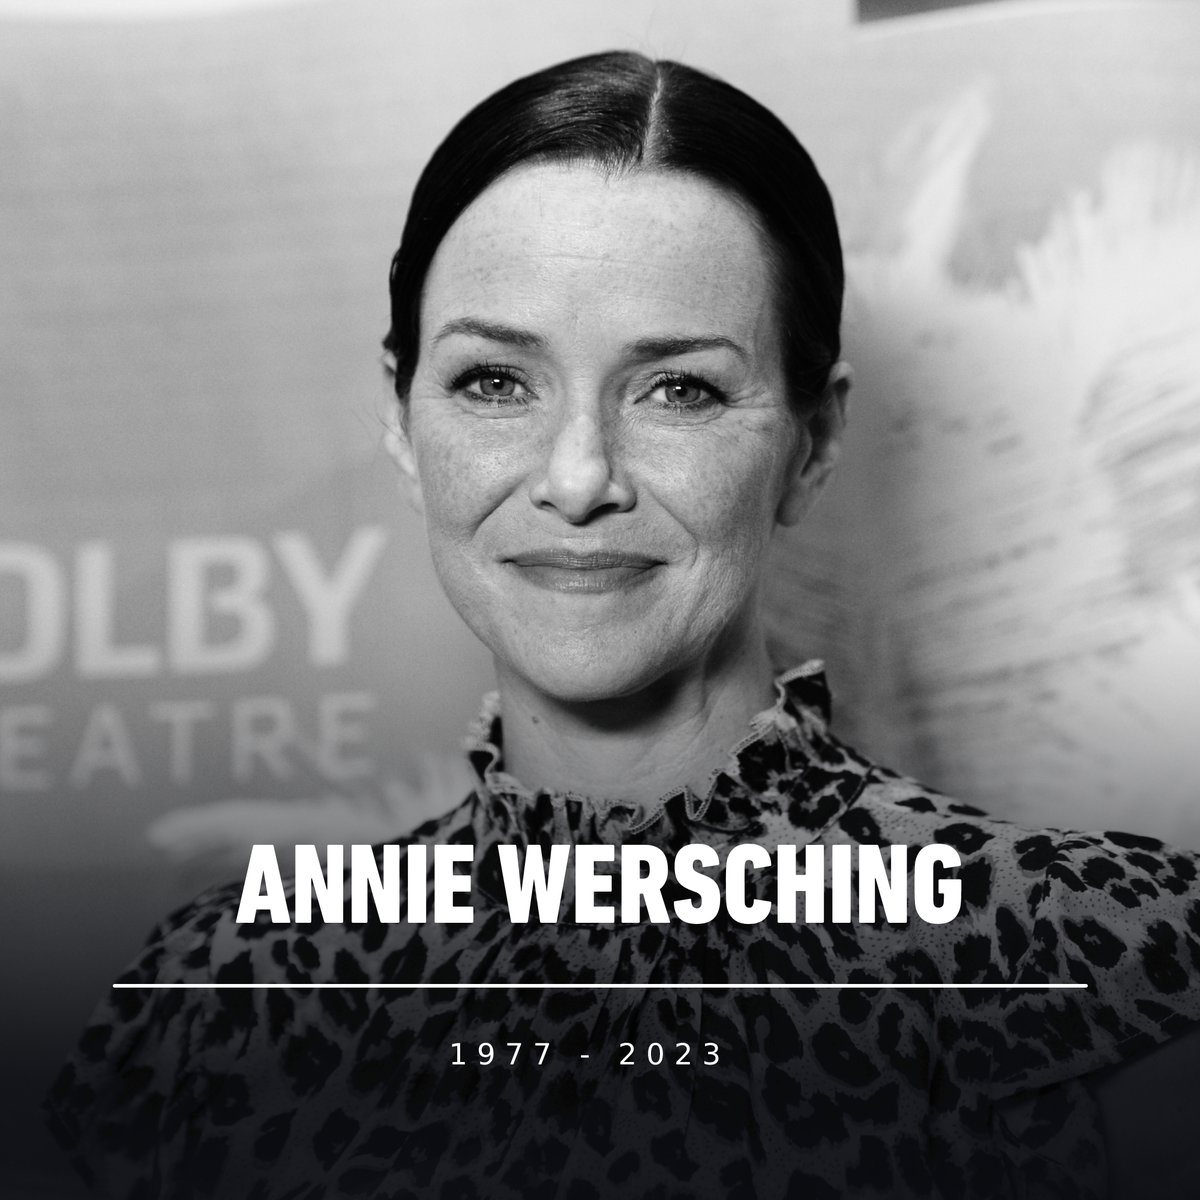 Annie Wersching, known for her roles in Star Trek: Picard, Timeless, and portraying Tess in the original The Last of Us, has died at the age of 45.